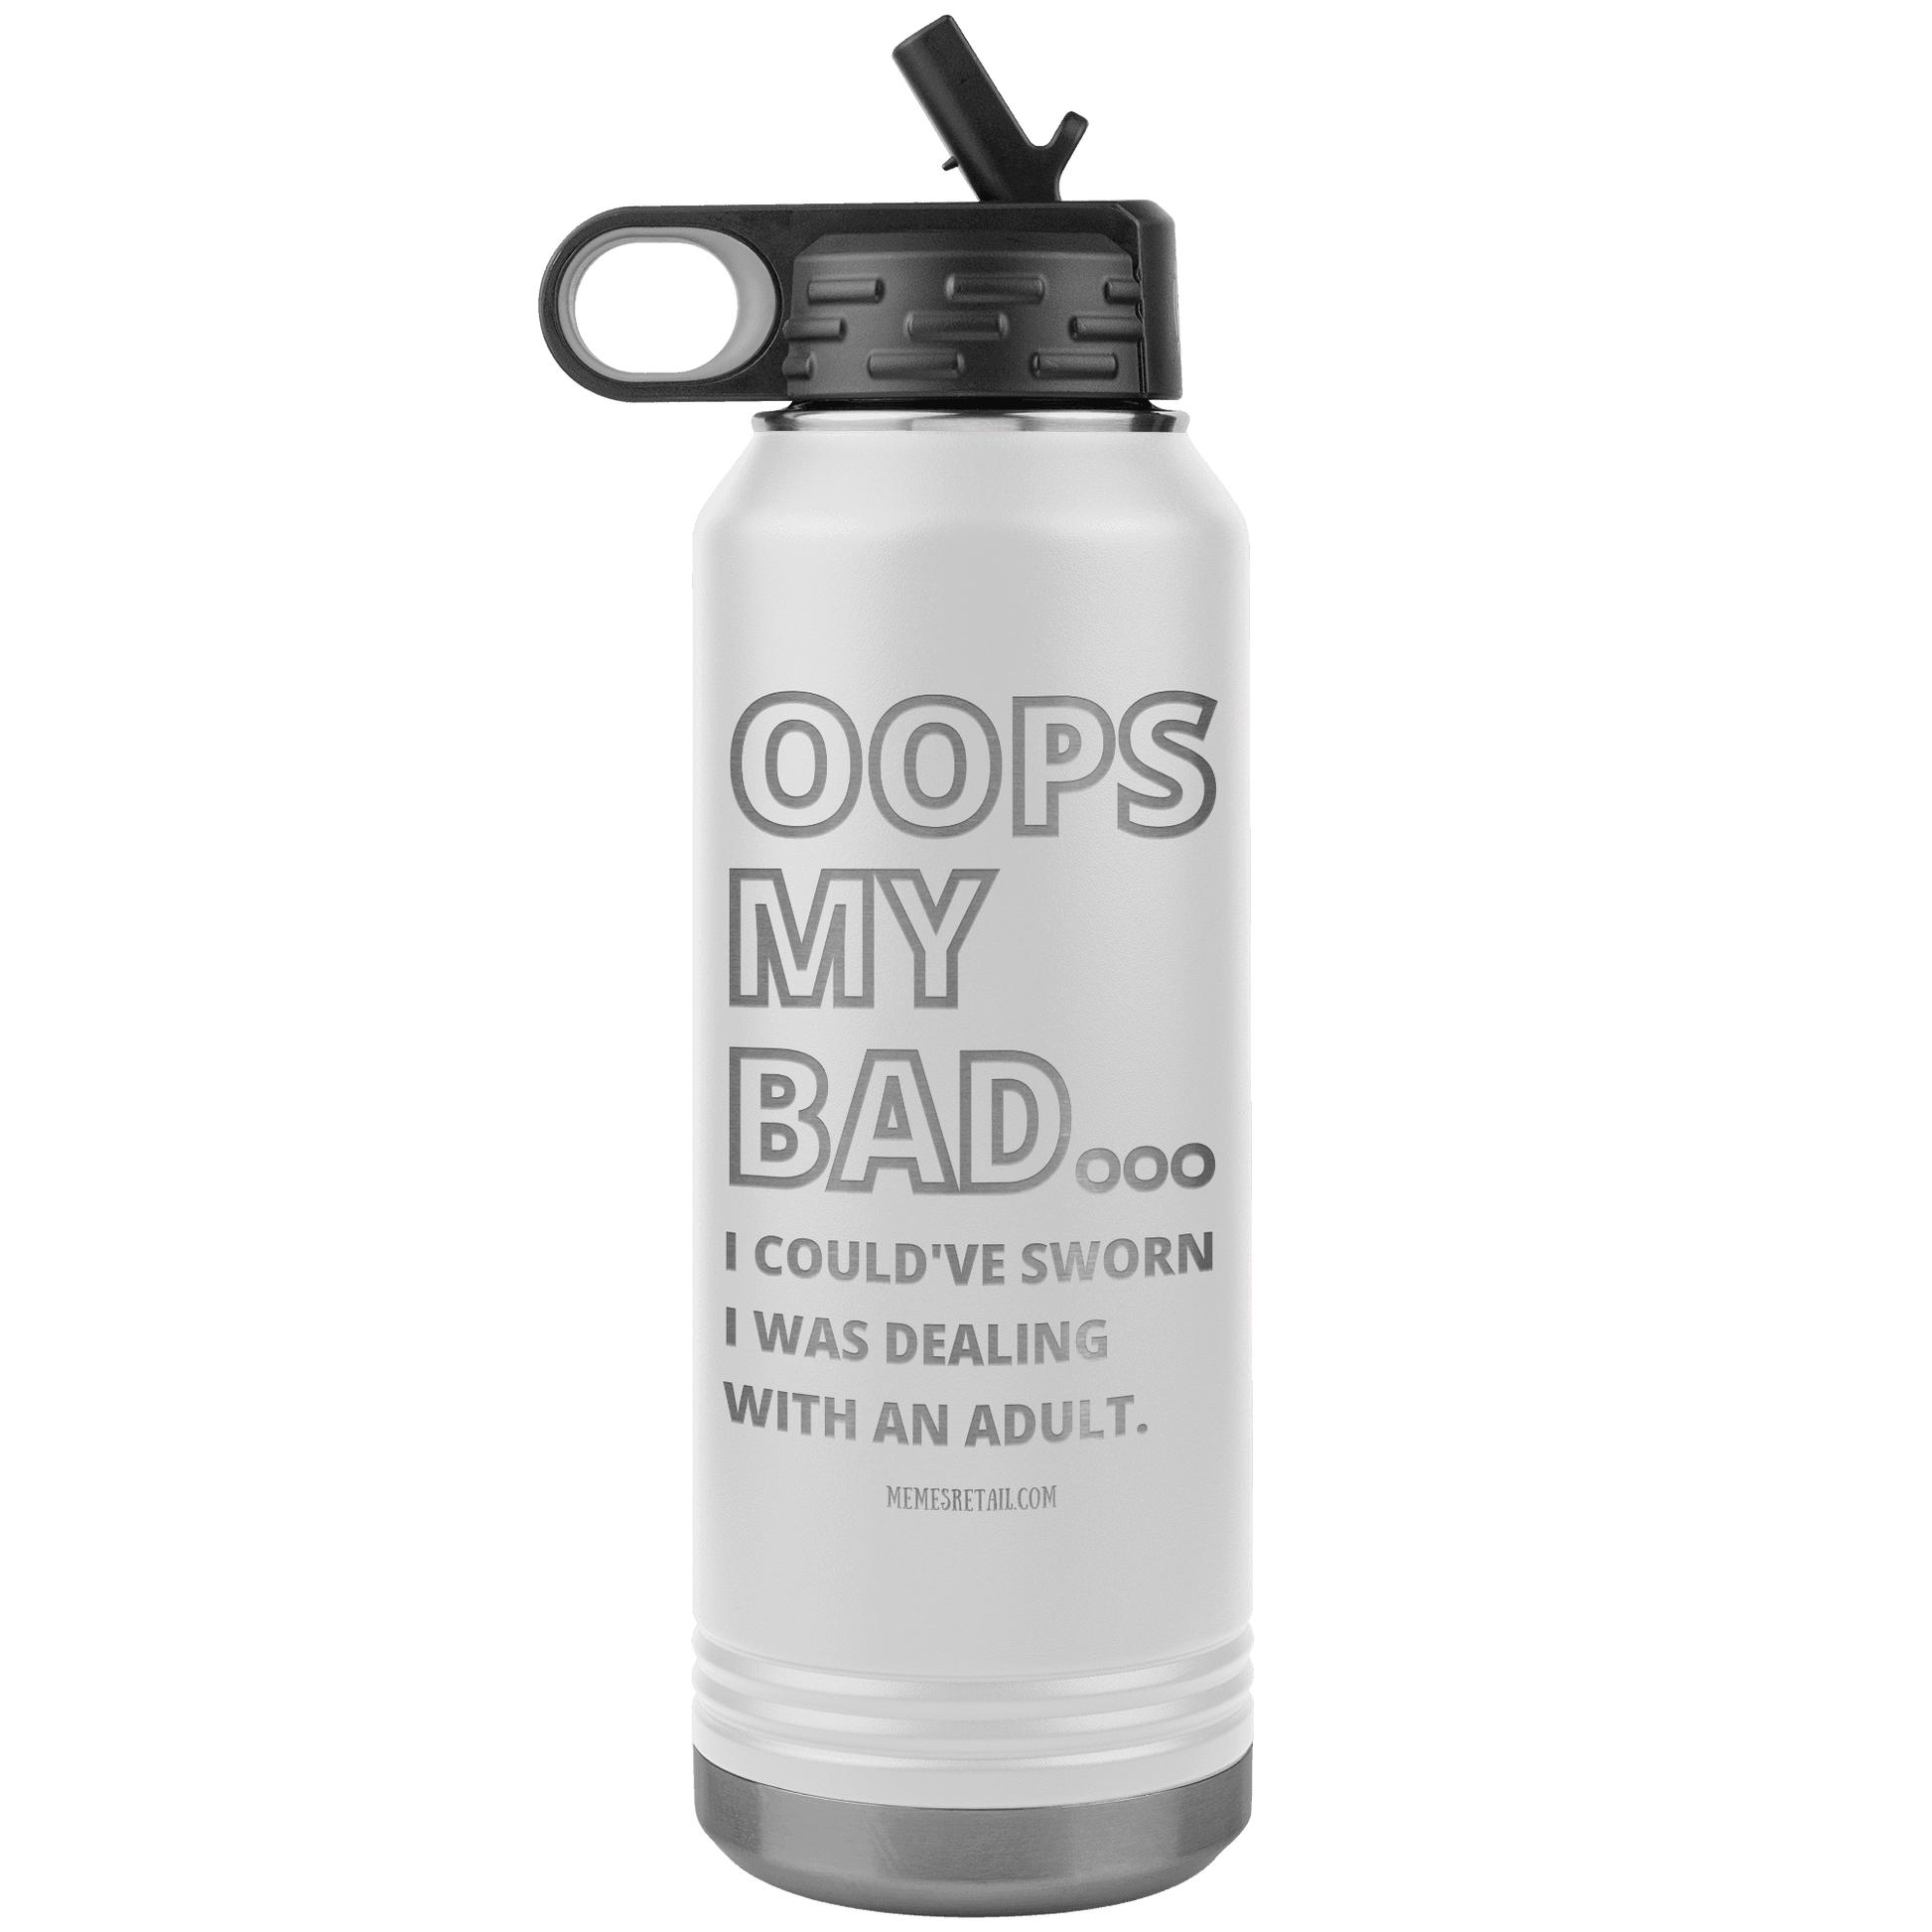 OOPS My bad...i could've sworn i was talking with an adult 32 oz Water Tumbler, White - MemesRetail.com